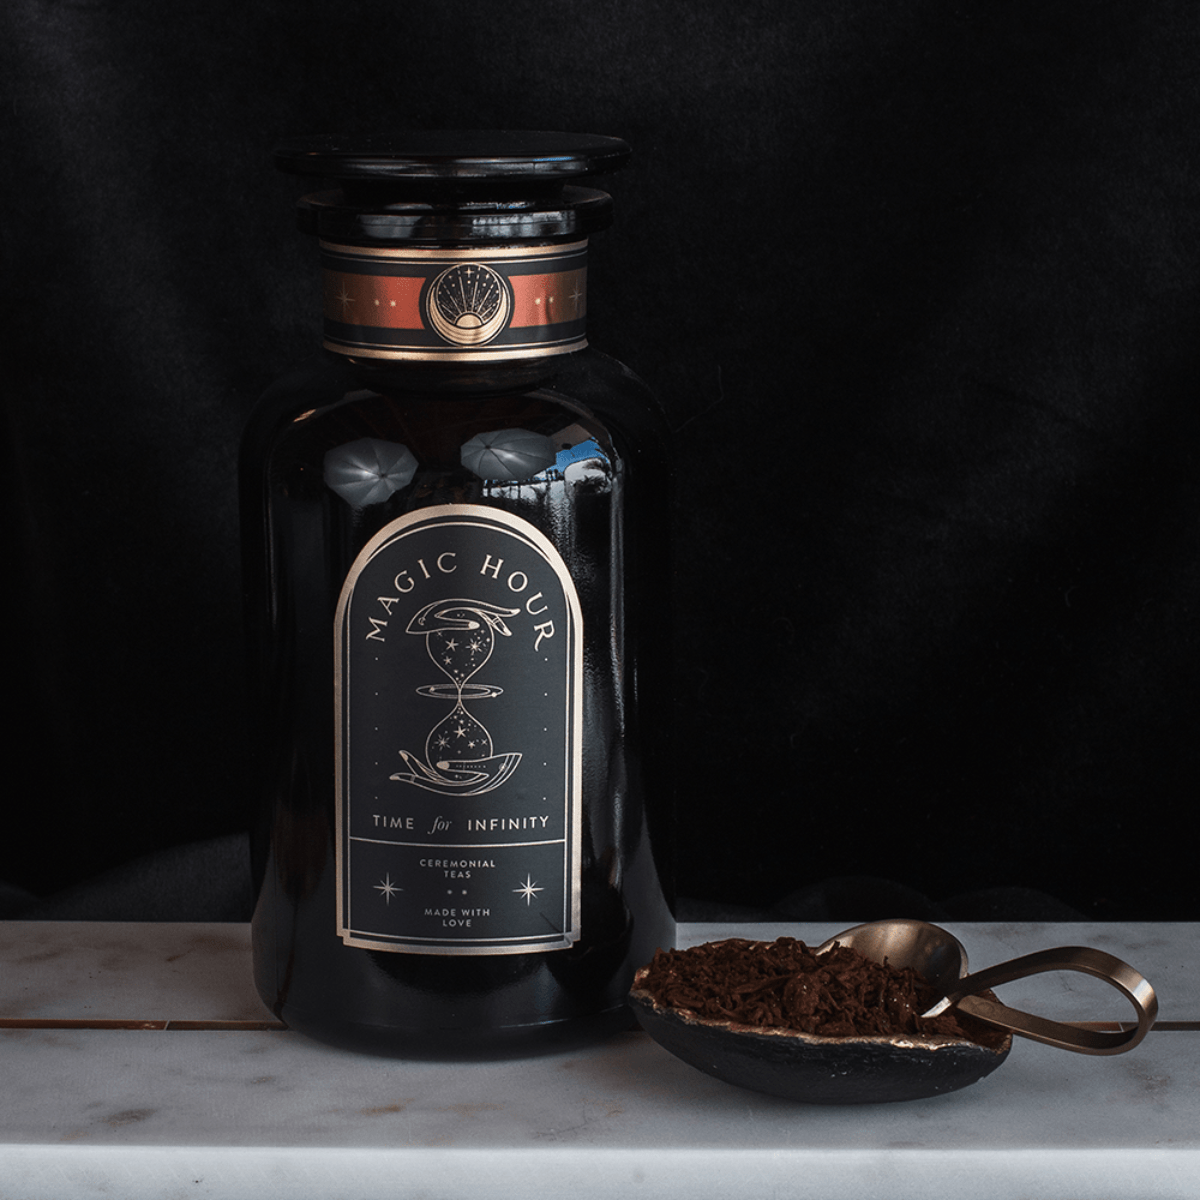 A black glass jar labeled "Club Magic Hour Rise & Shine Black Tea" with an illustration of an hourglass, set against a dark background. Next to the jar is a gold spoon resting in an oval dish filled with loose leaf tea, possibly organic tea.